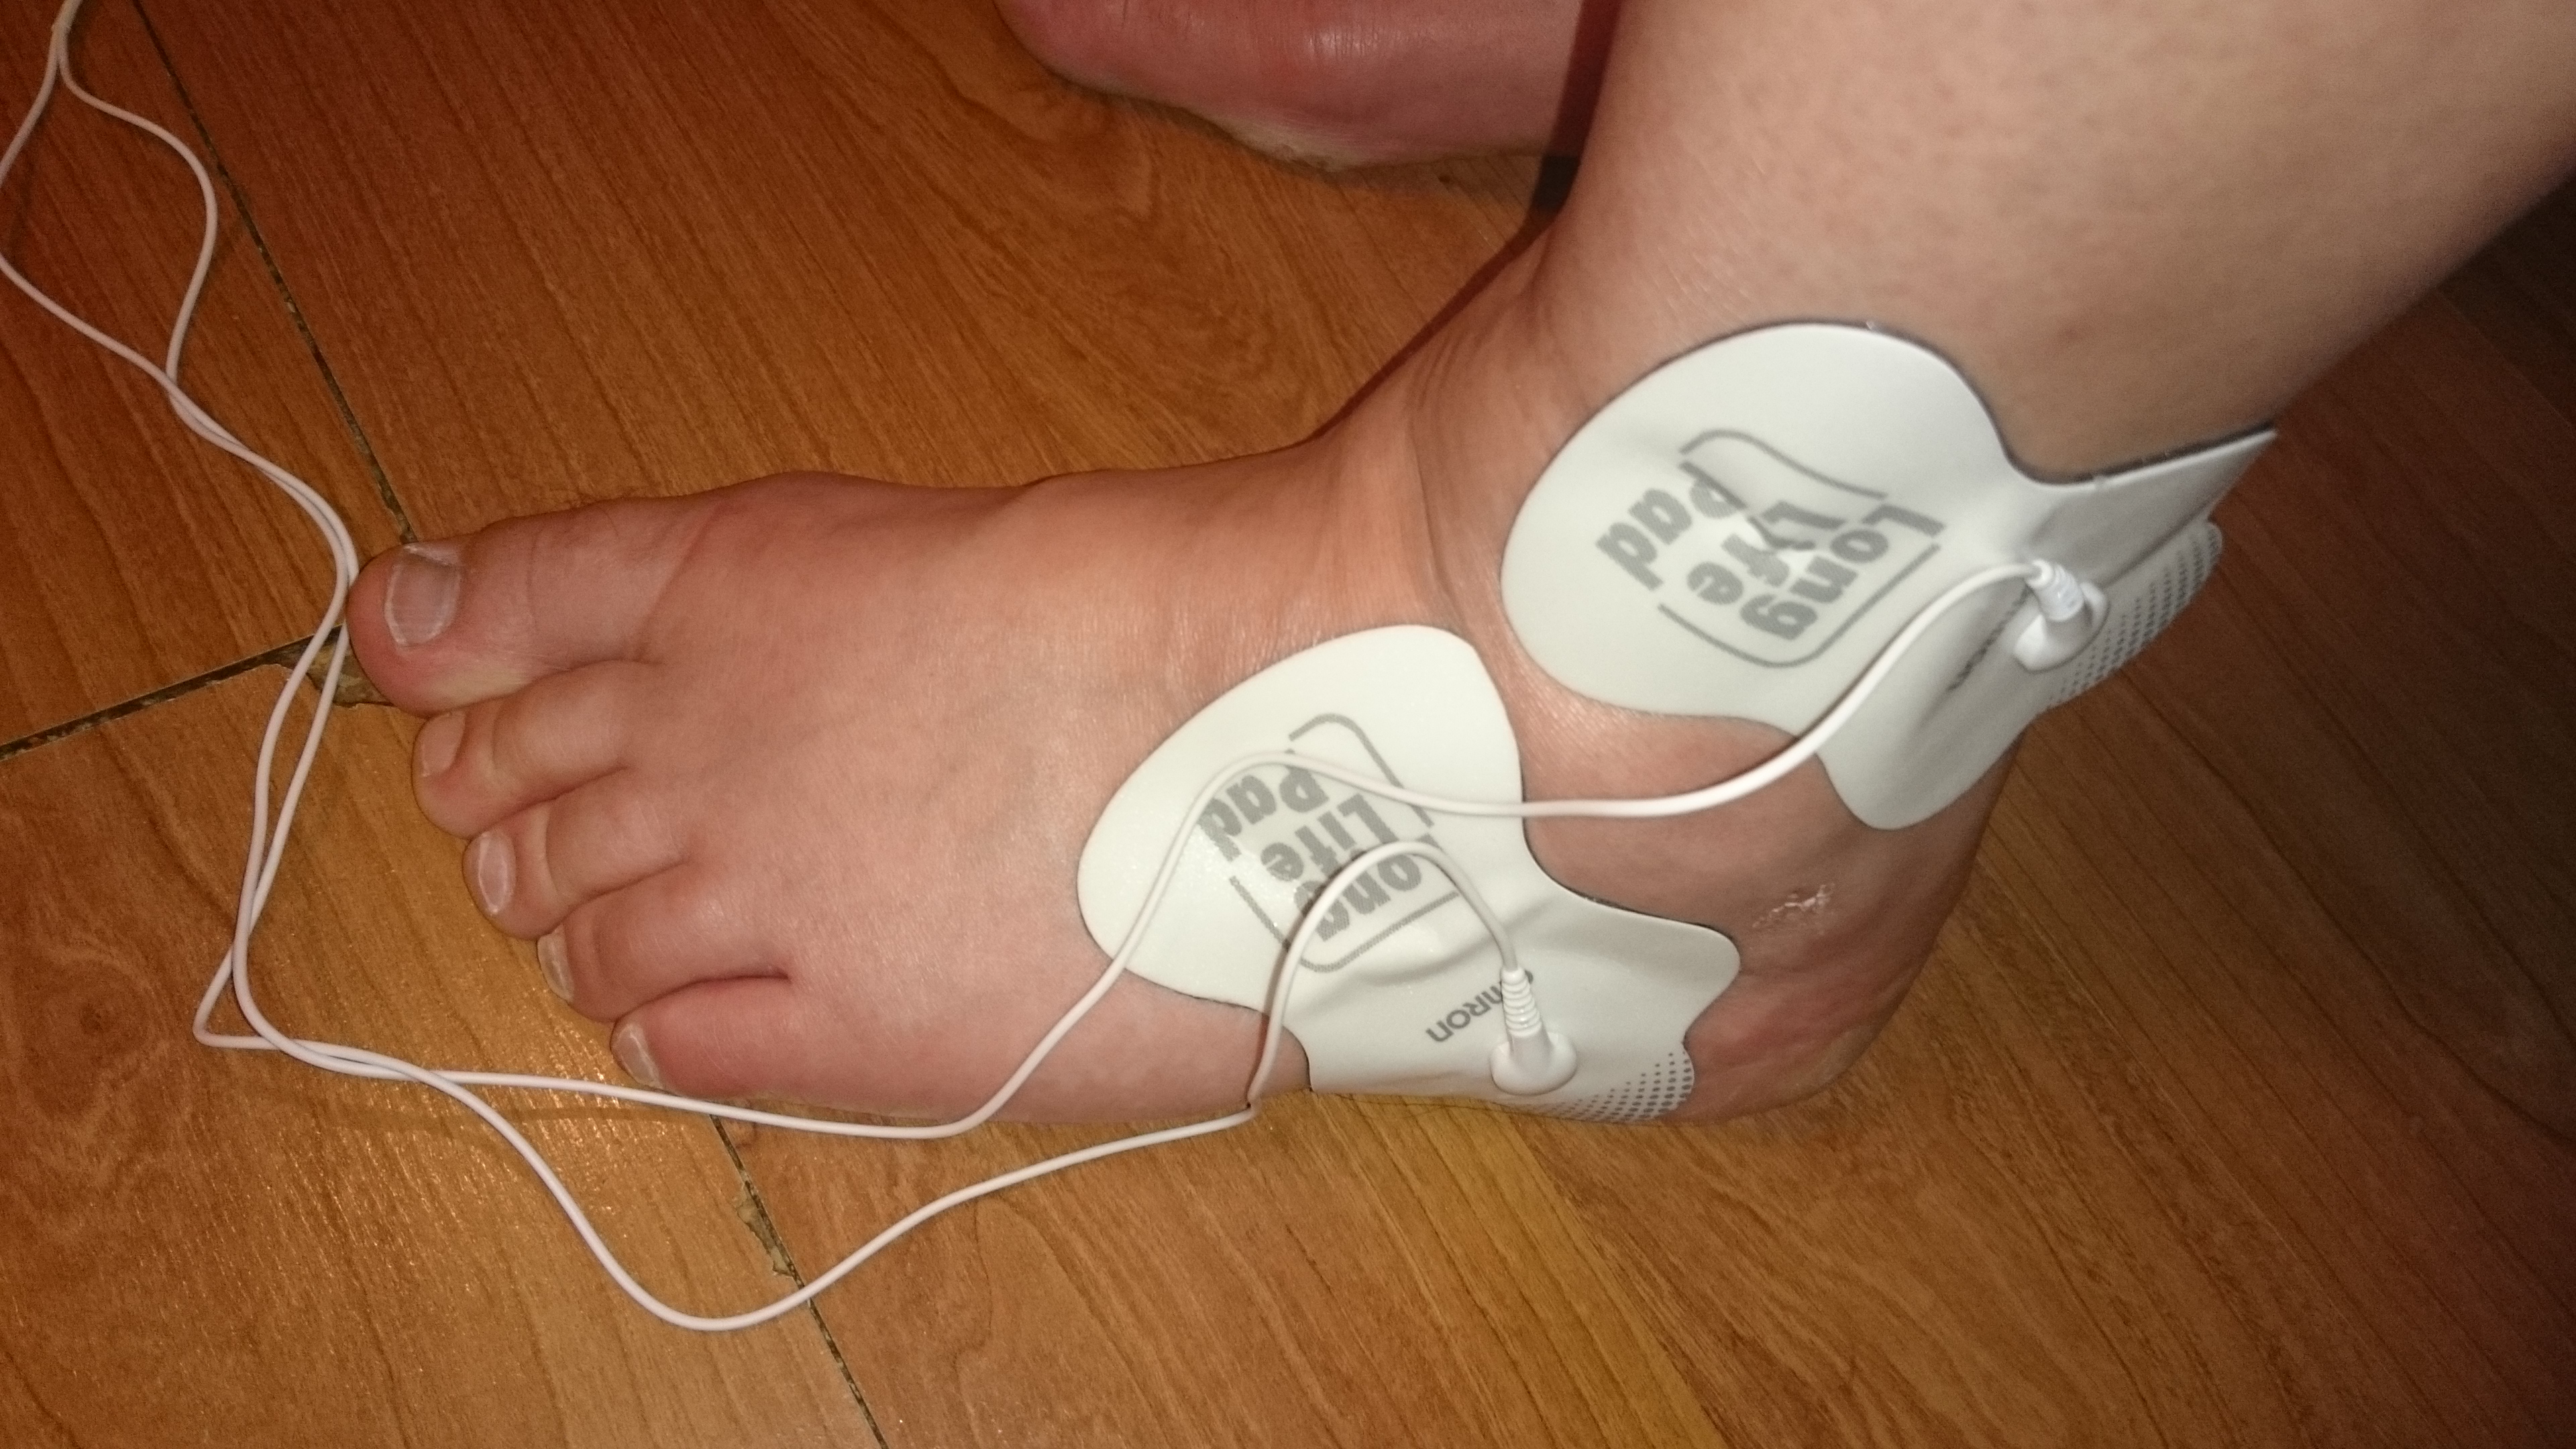 Electrotherapy TENS Unit Effective Pain Relief From Omron